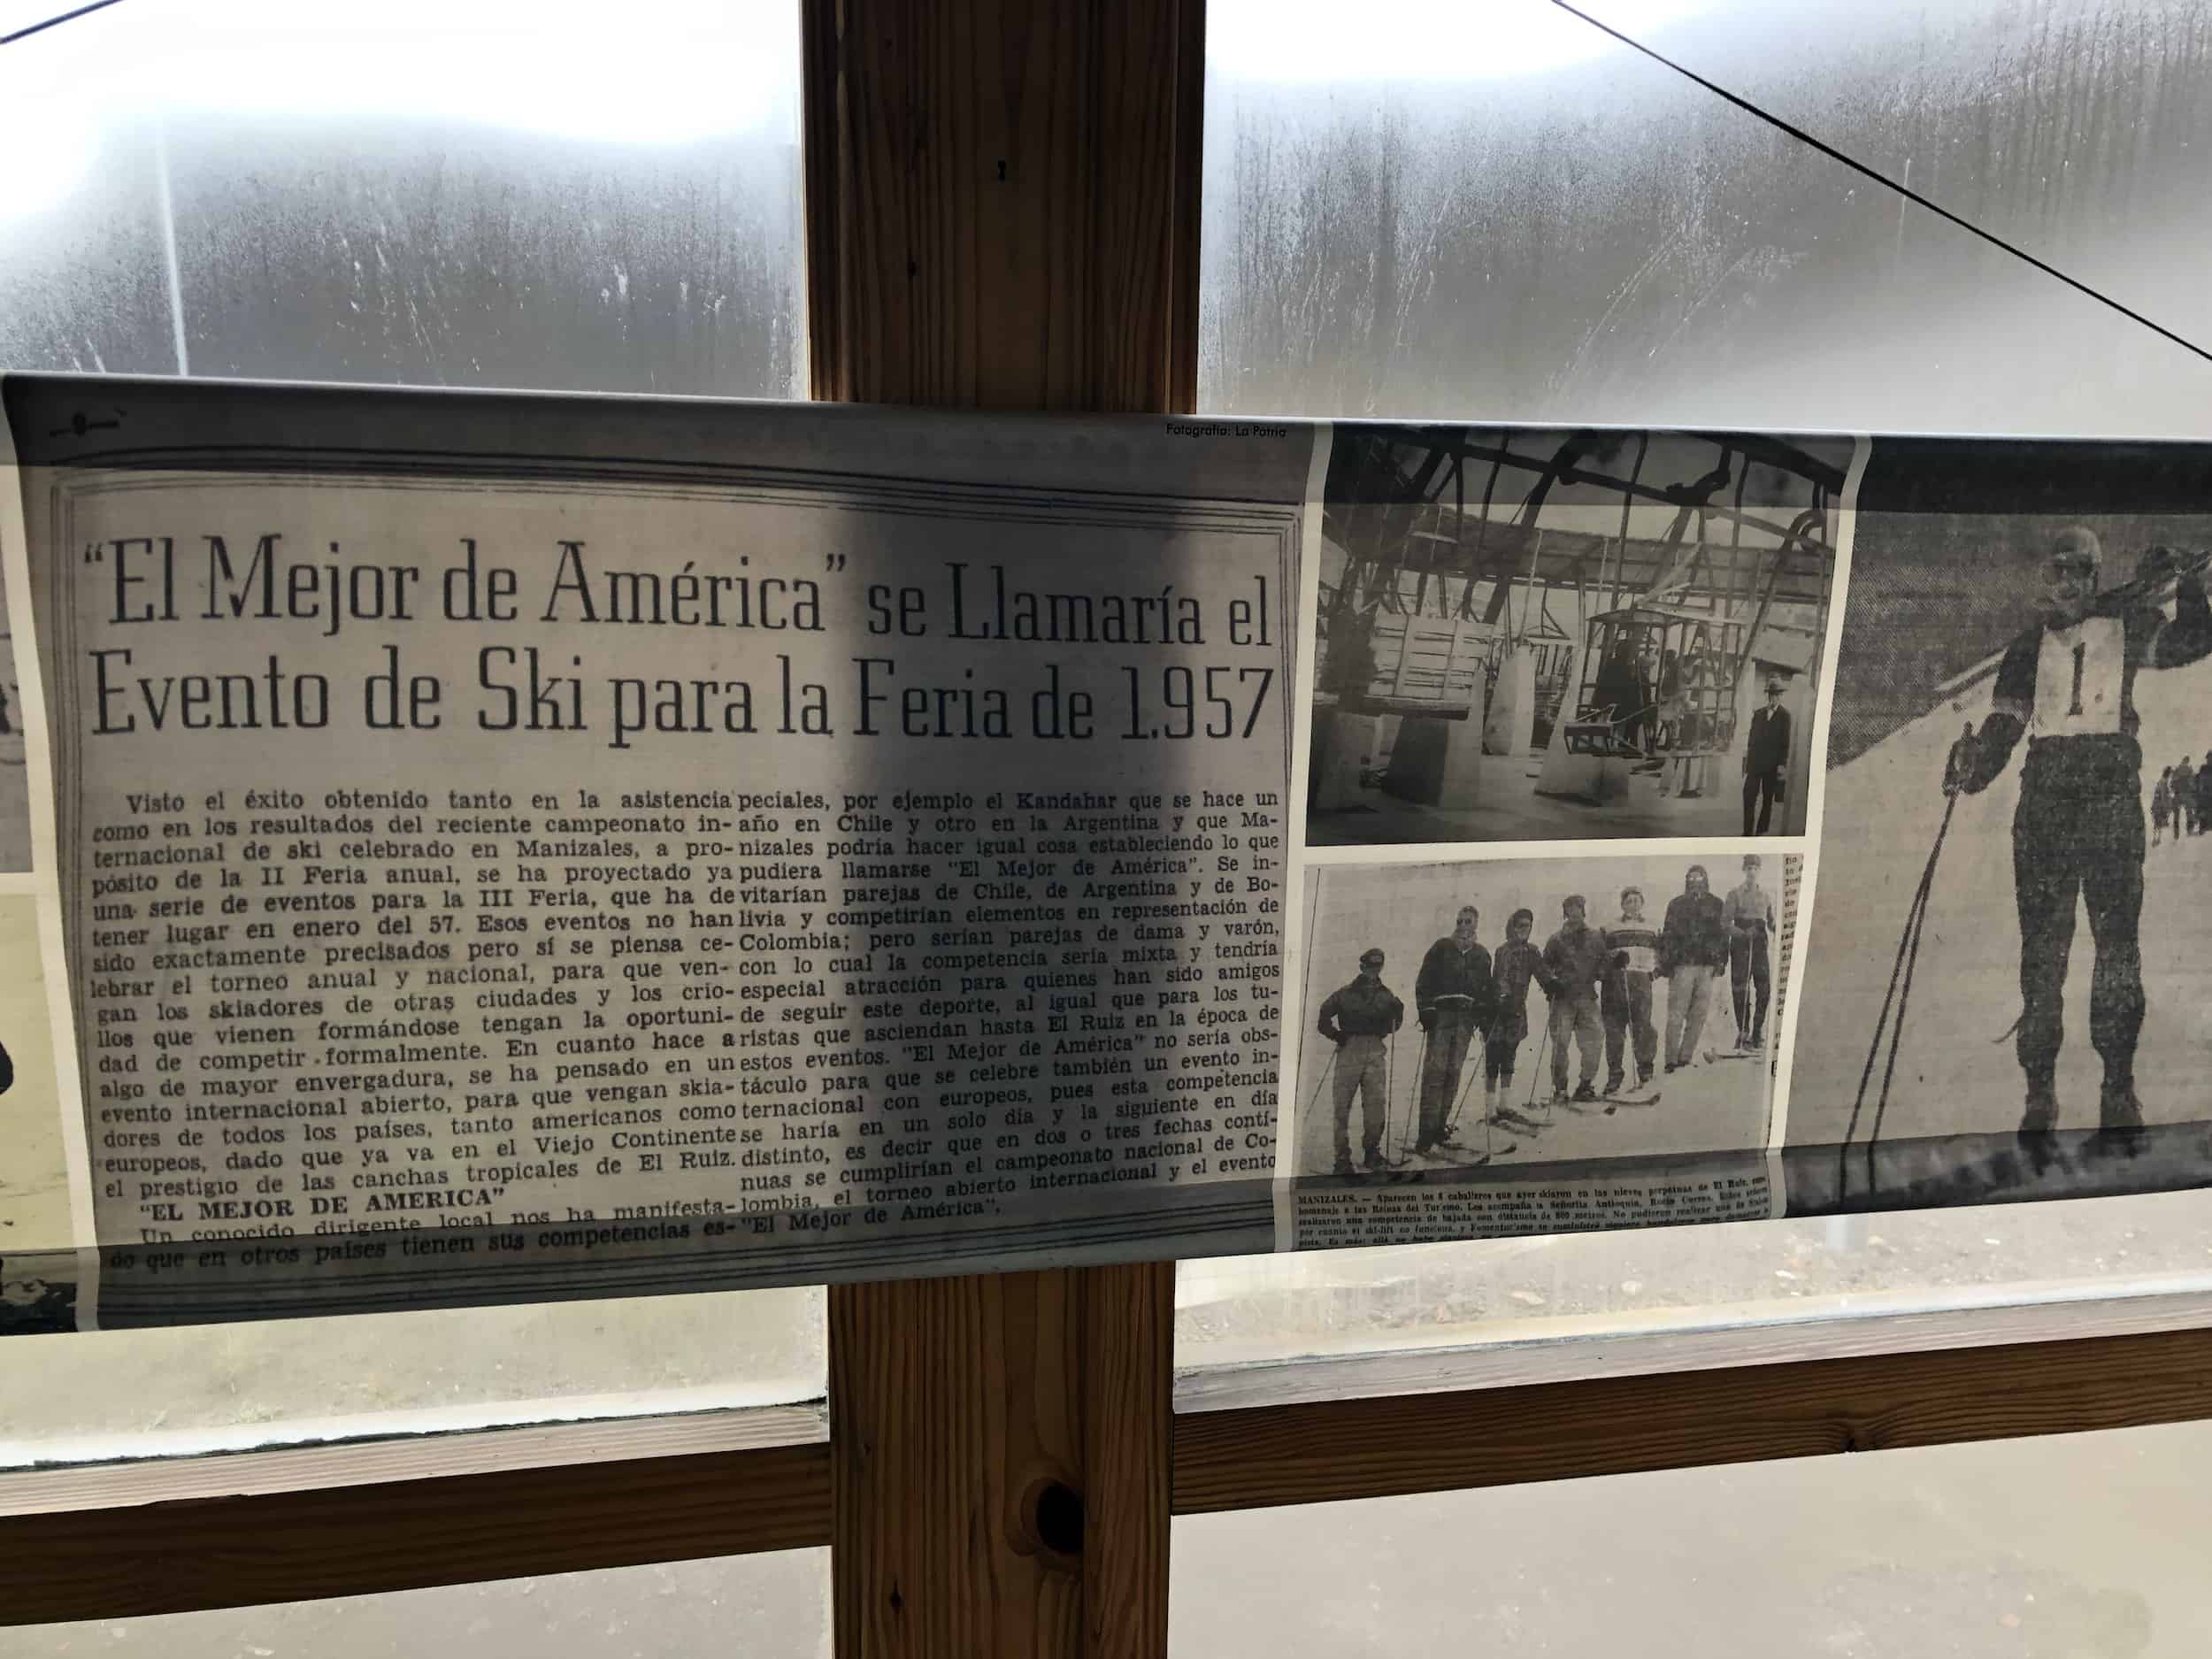 Newspaper clippings and photos of the ski resort at Nevado del Ruiz at Los Nevados National Park in Colombia